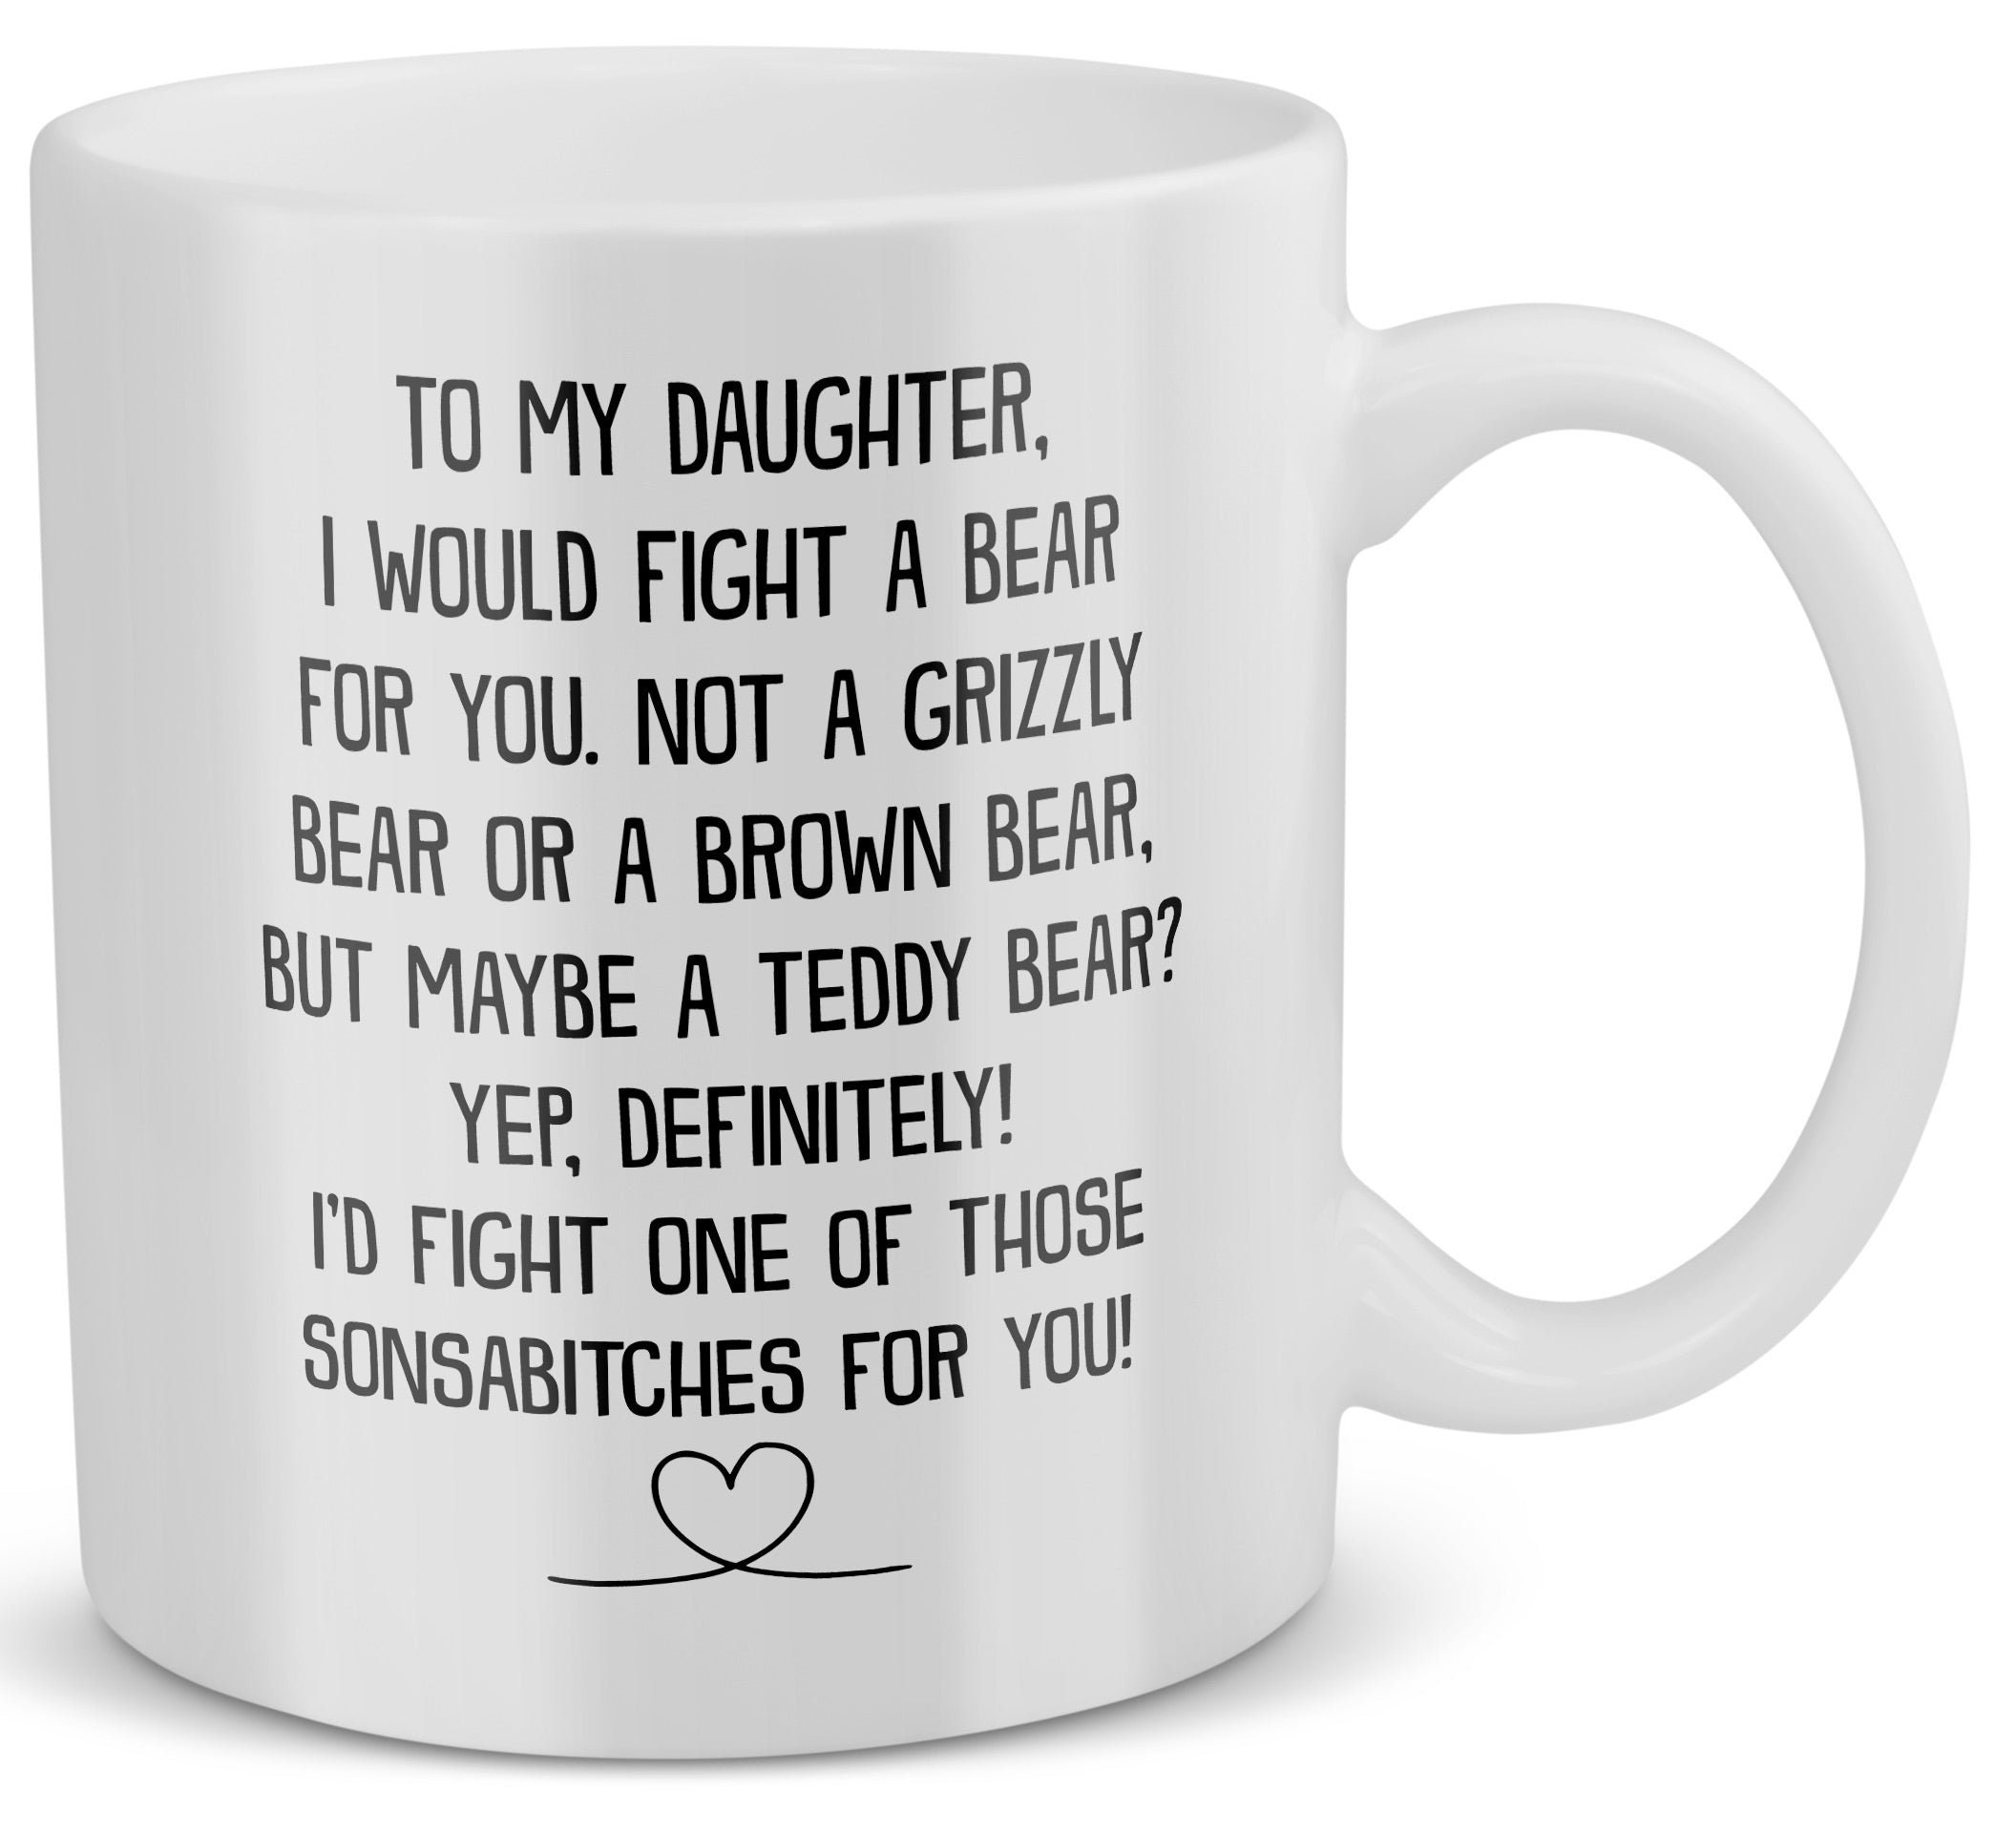 Mug for Mom with Crown Cute Coffee Ceramic Cup Unique Gift for Women Queen Wife Grandma Girlfriend Daughter Mother's Day - 15oz with Lid & Spoon